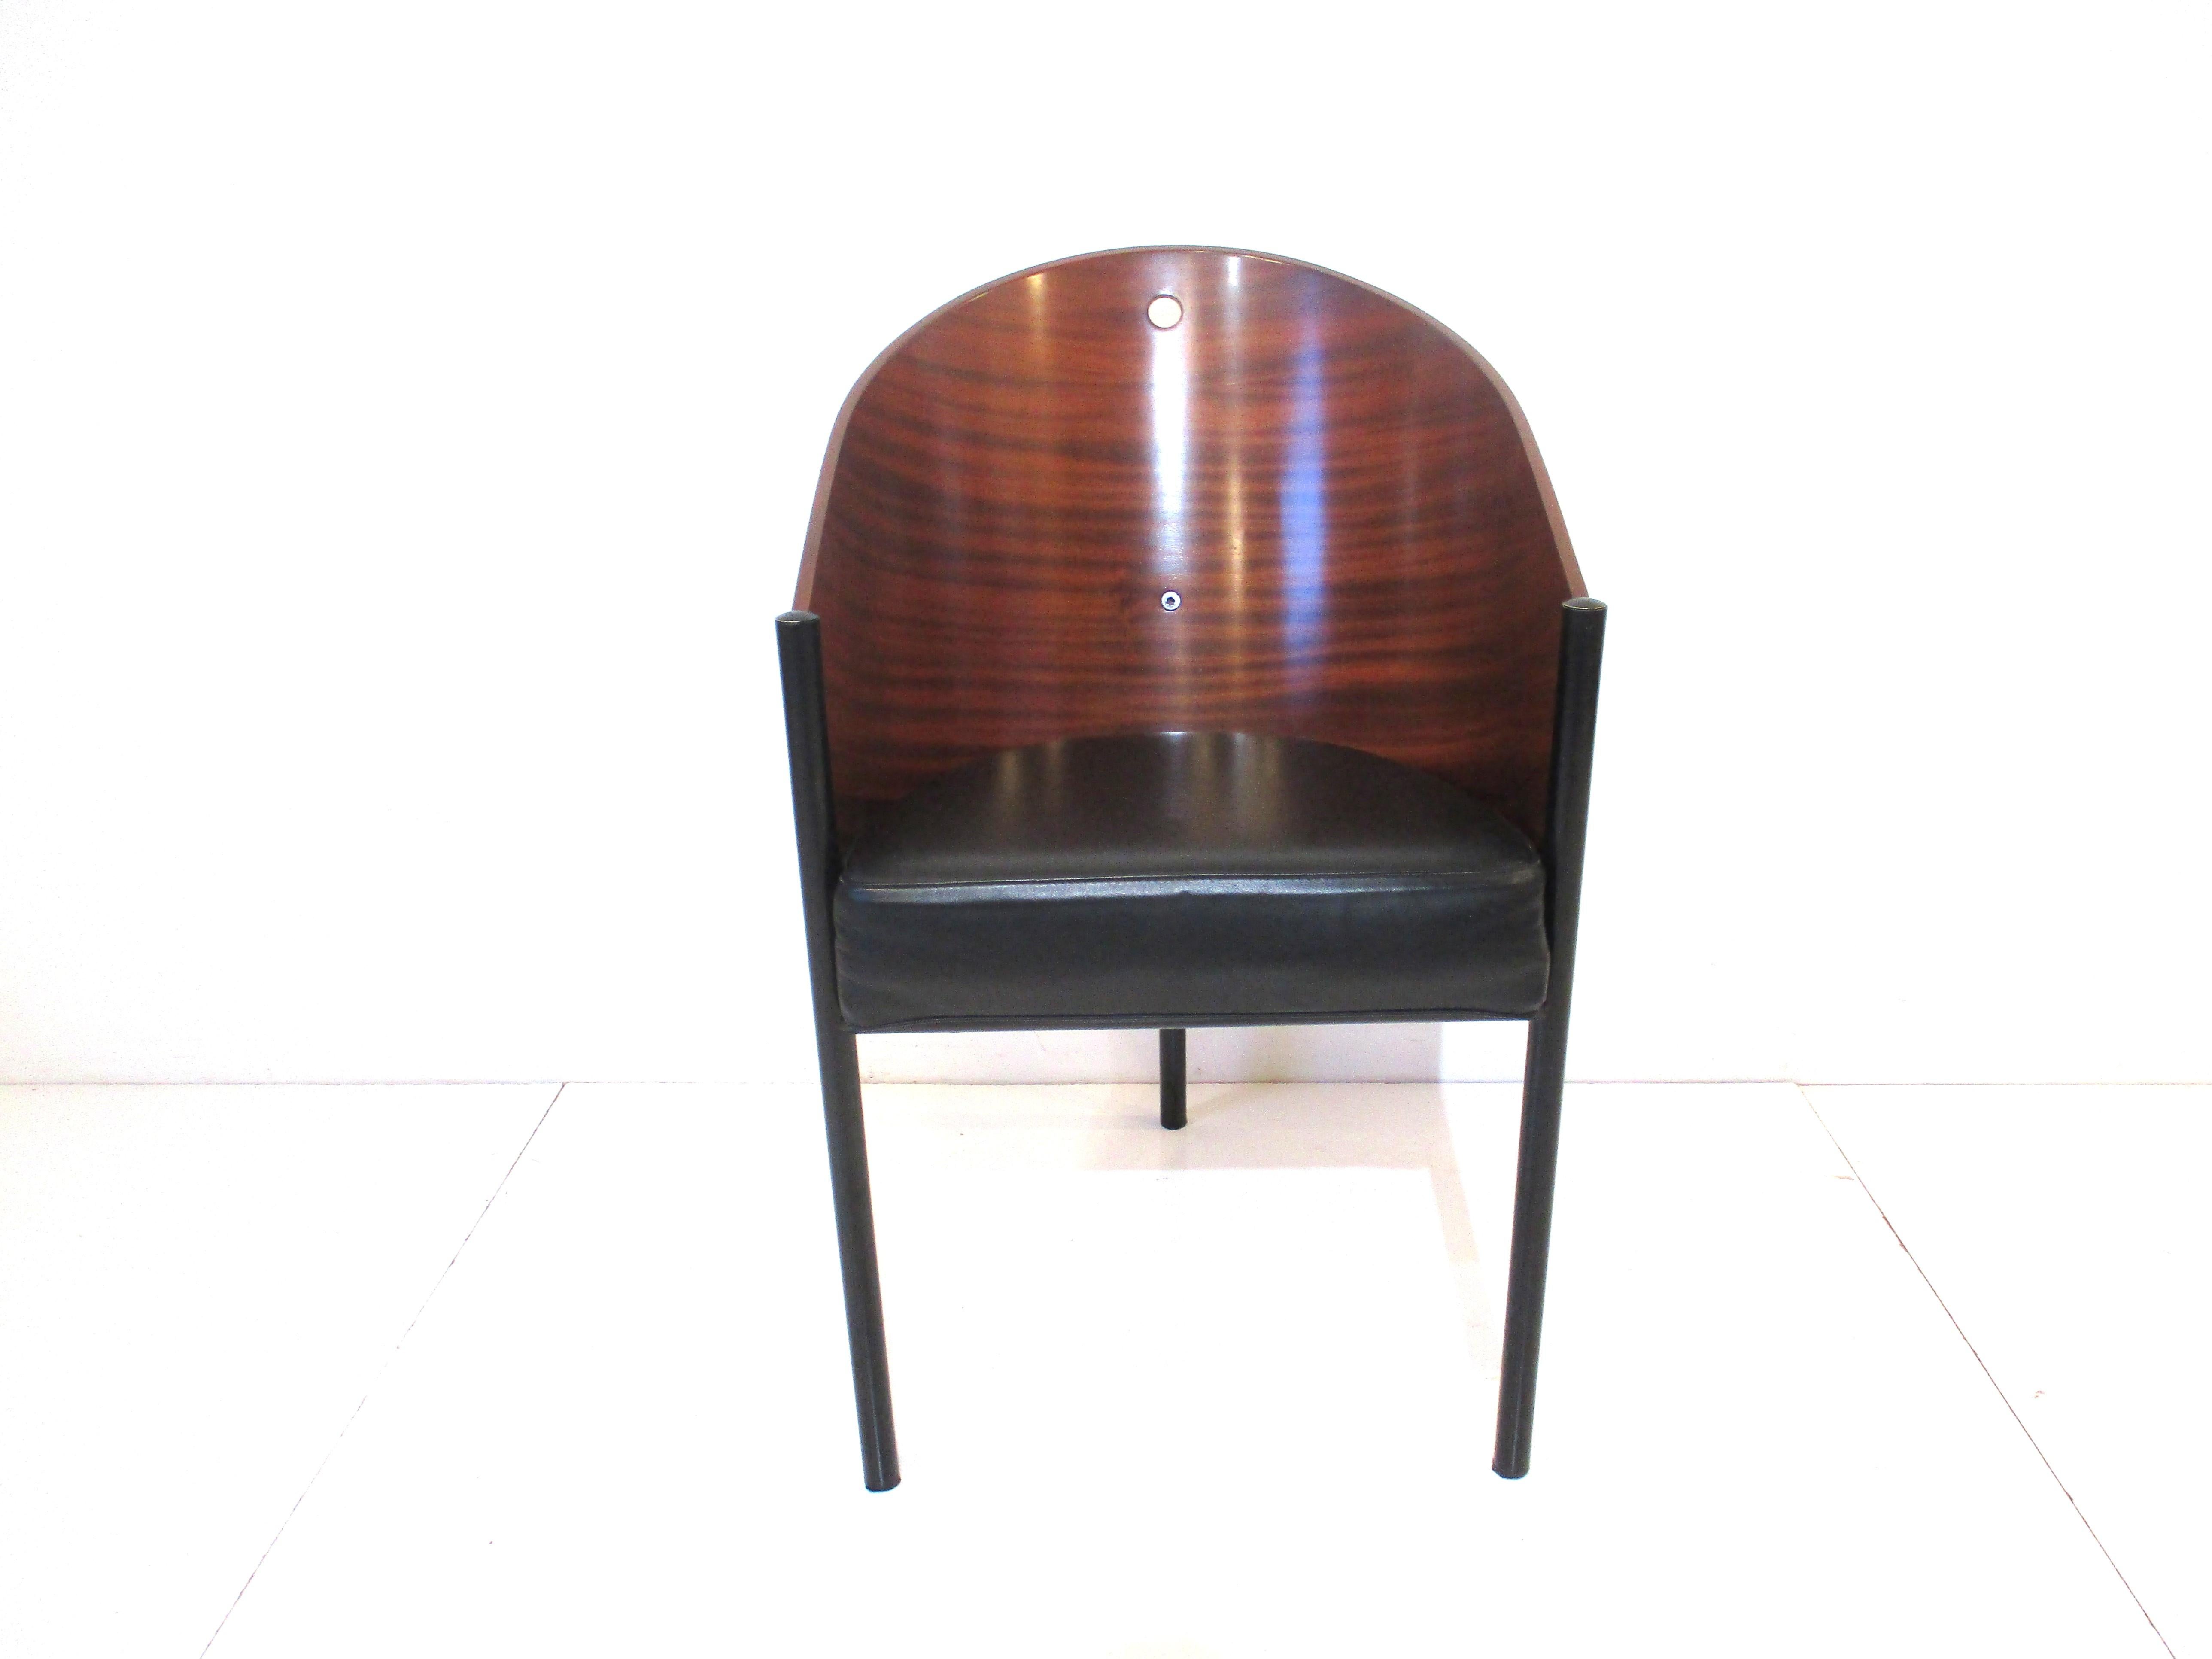 A very well crafted Costes chair by French designer Philippe Starck with rounded wood back and hole detail to the upper edge for pulling the chair into position . The satin black three legs and leather cushion make this chair comfortable yet